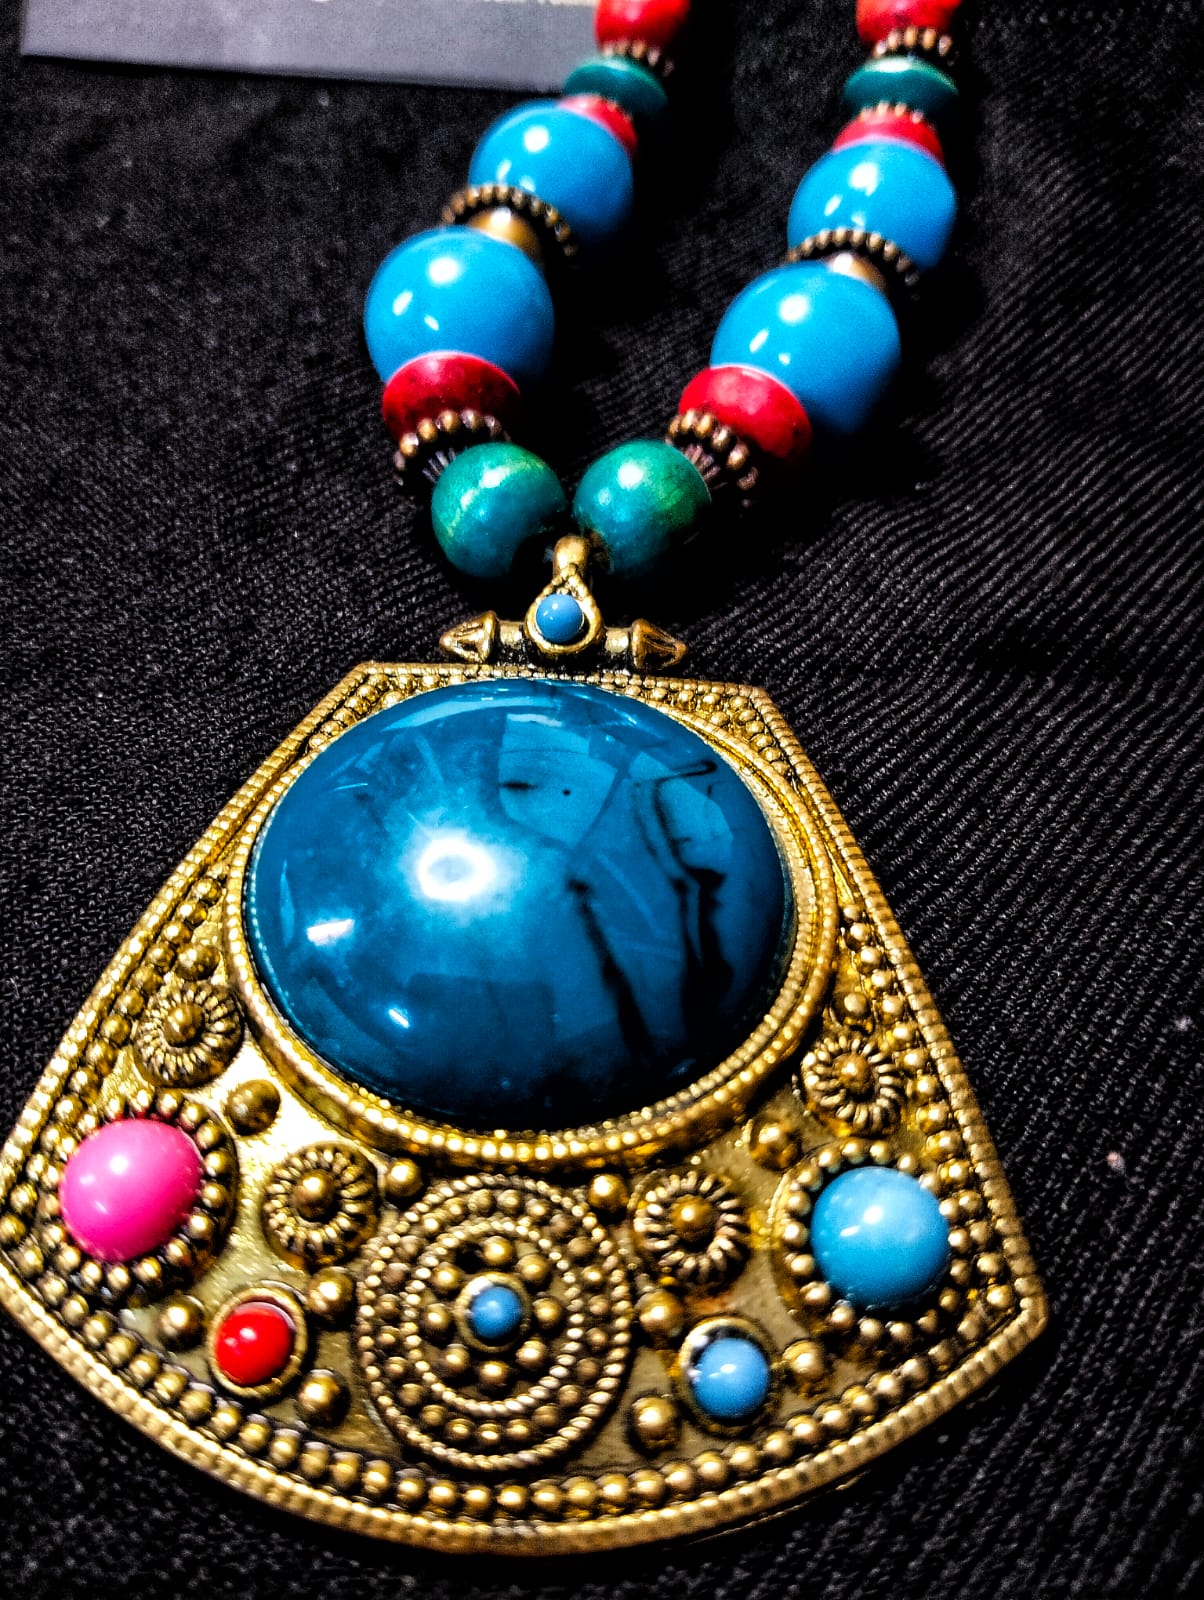 Brass-Colored Metal Pendant with Blue Plastic Stones on Antique-Style Maala Necklace